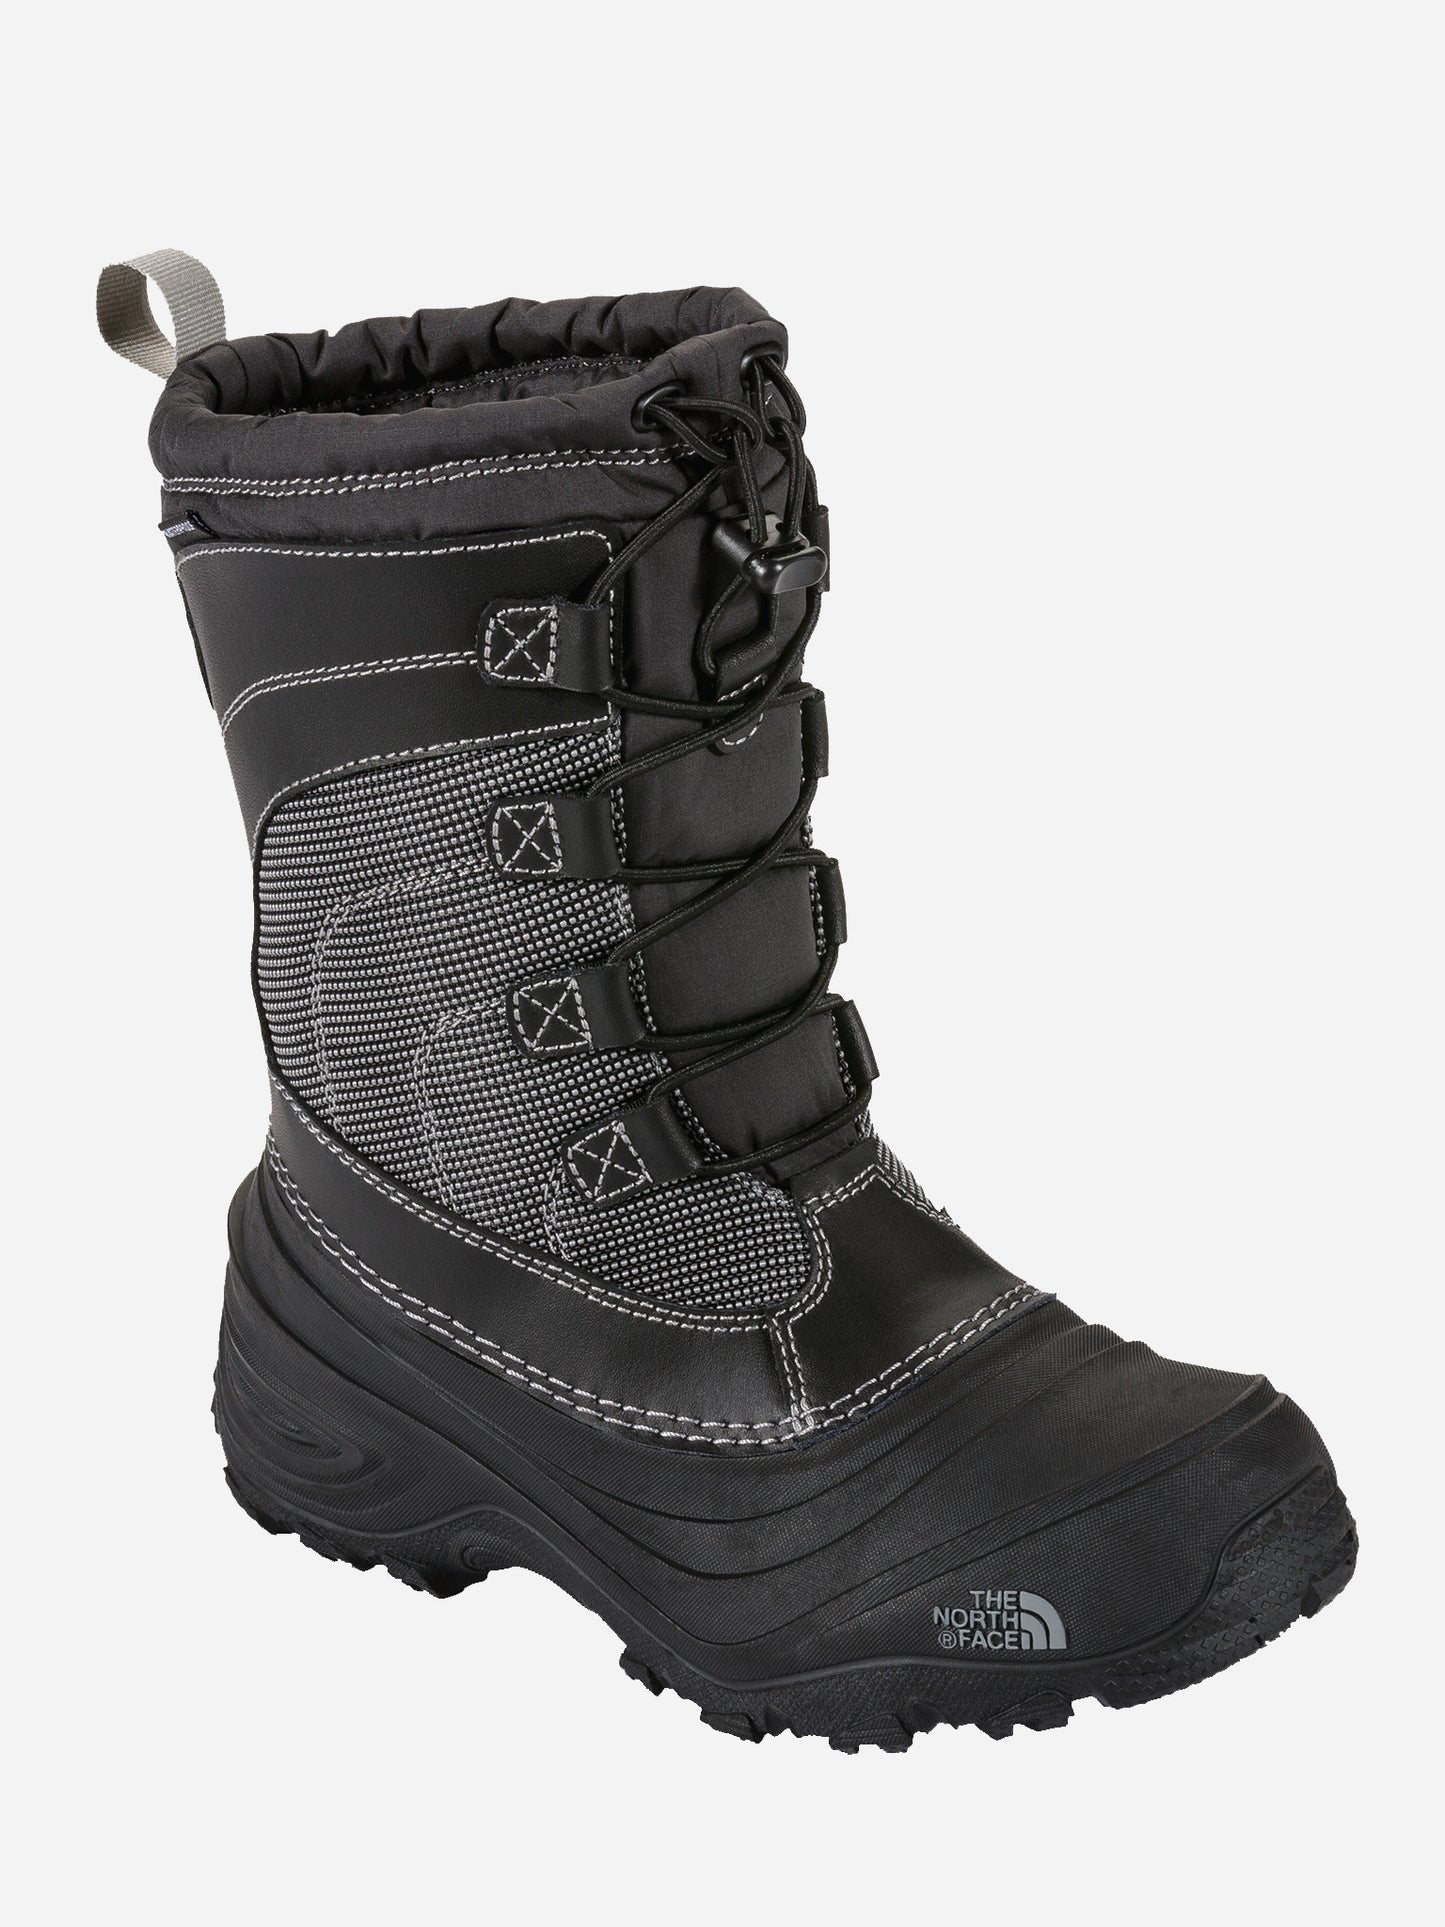 The North Face Youth Alpenglow IV